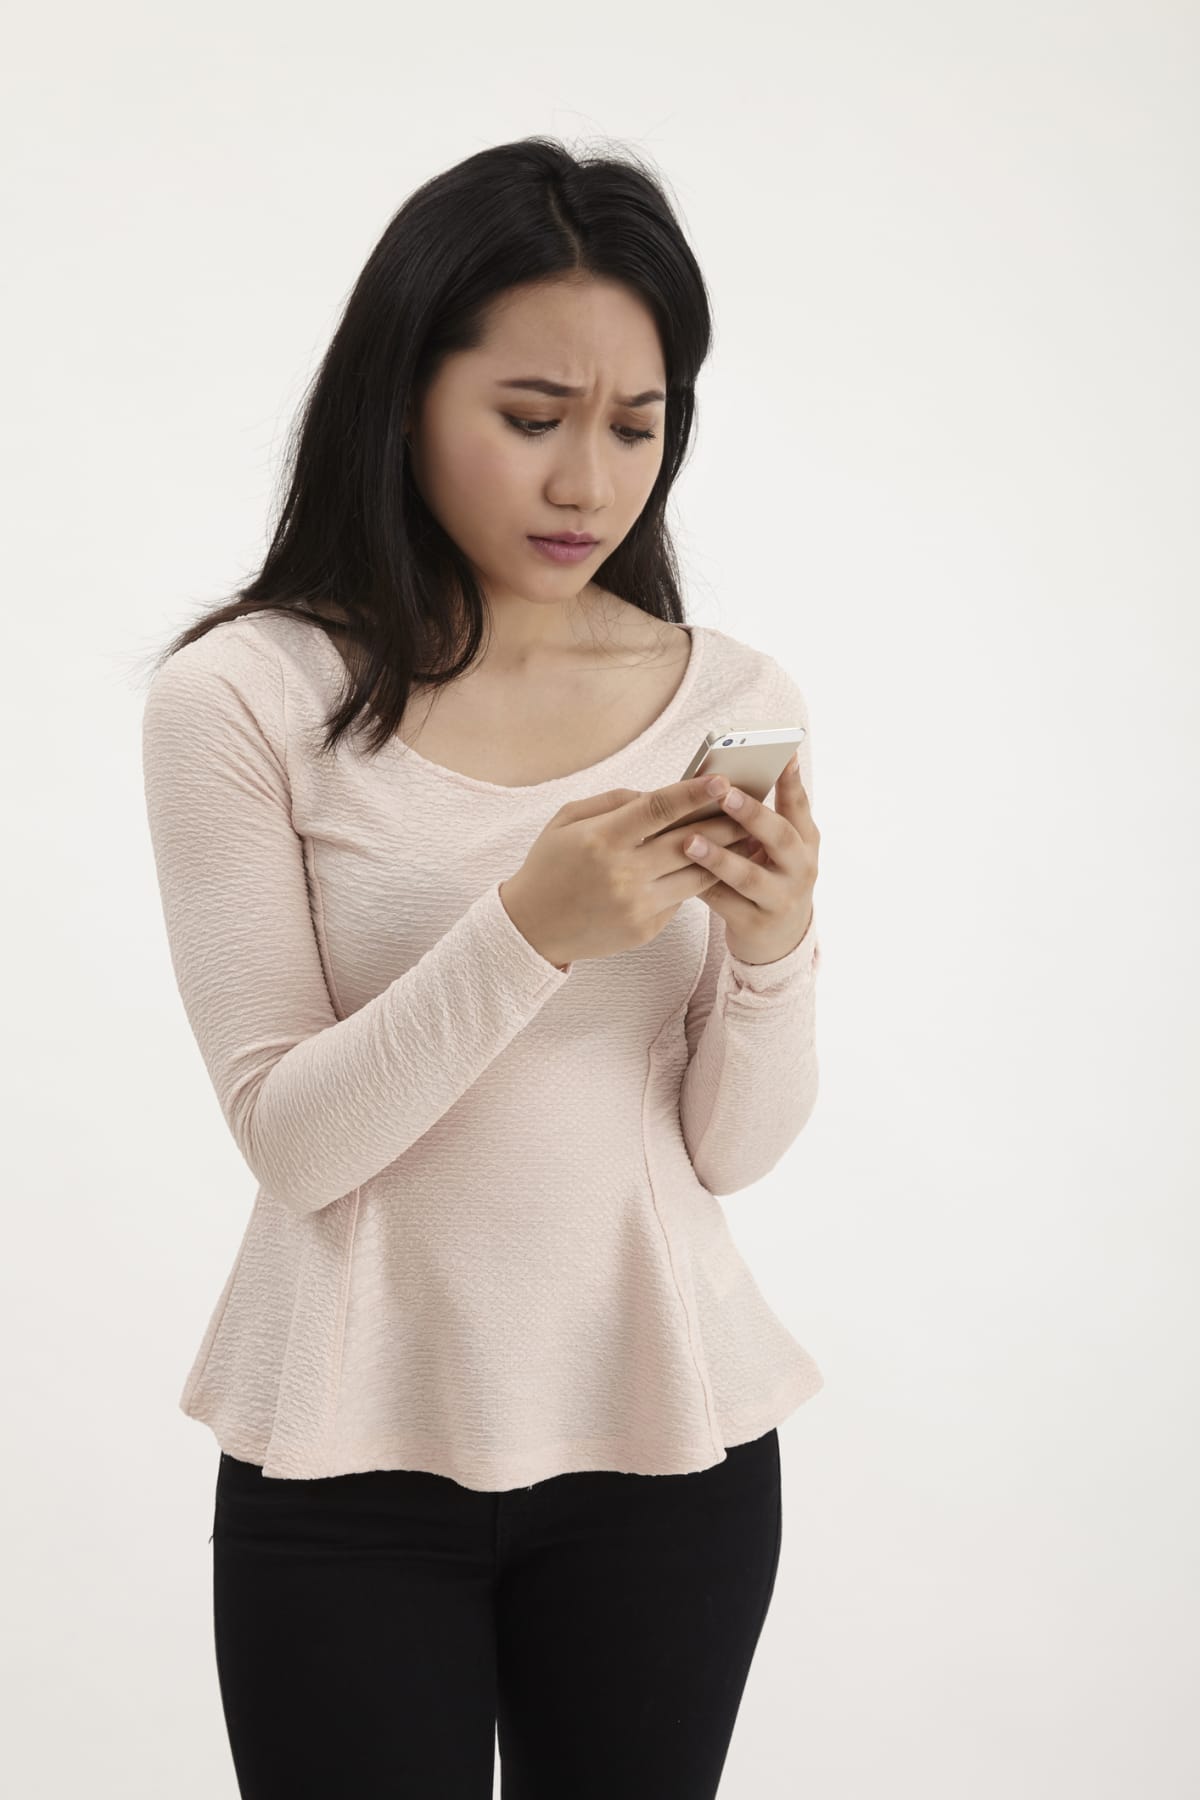 A woman looking at her phone in front of a white background